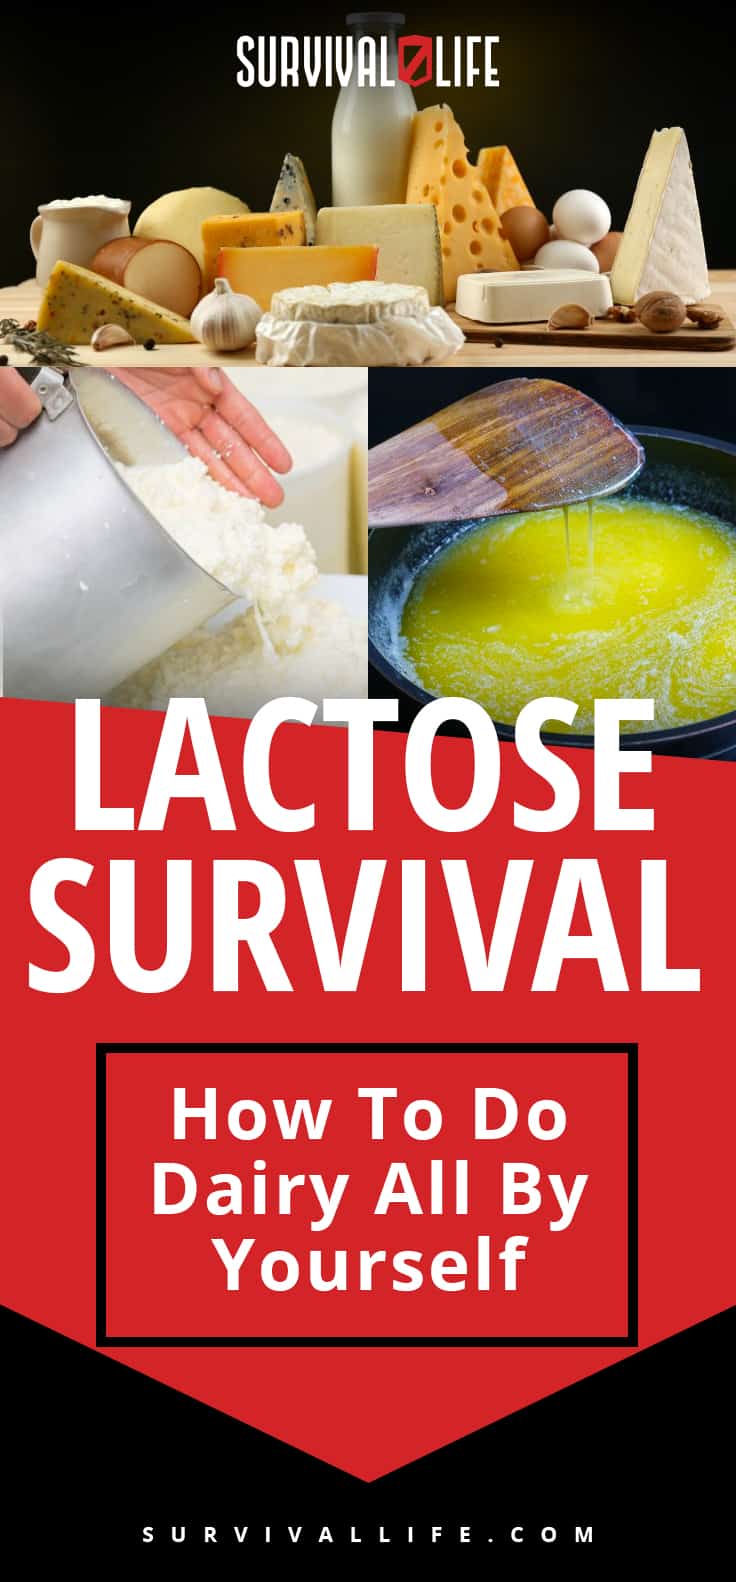 Lactose Survival – How To Do Dairy All By Yourself